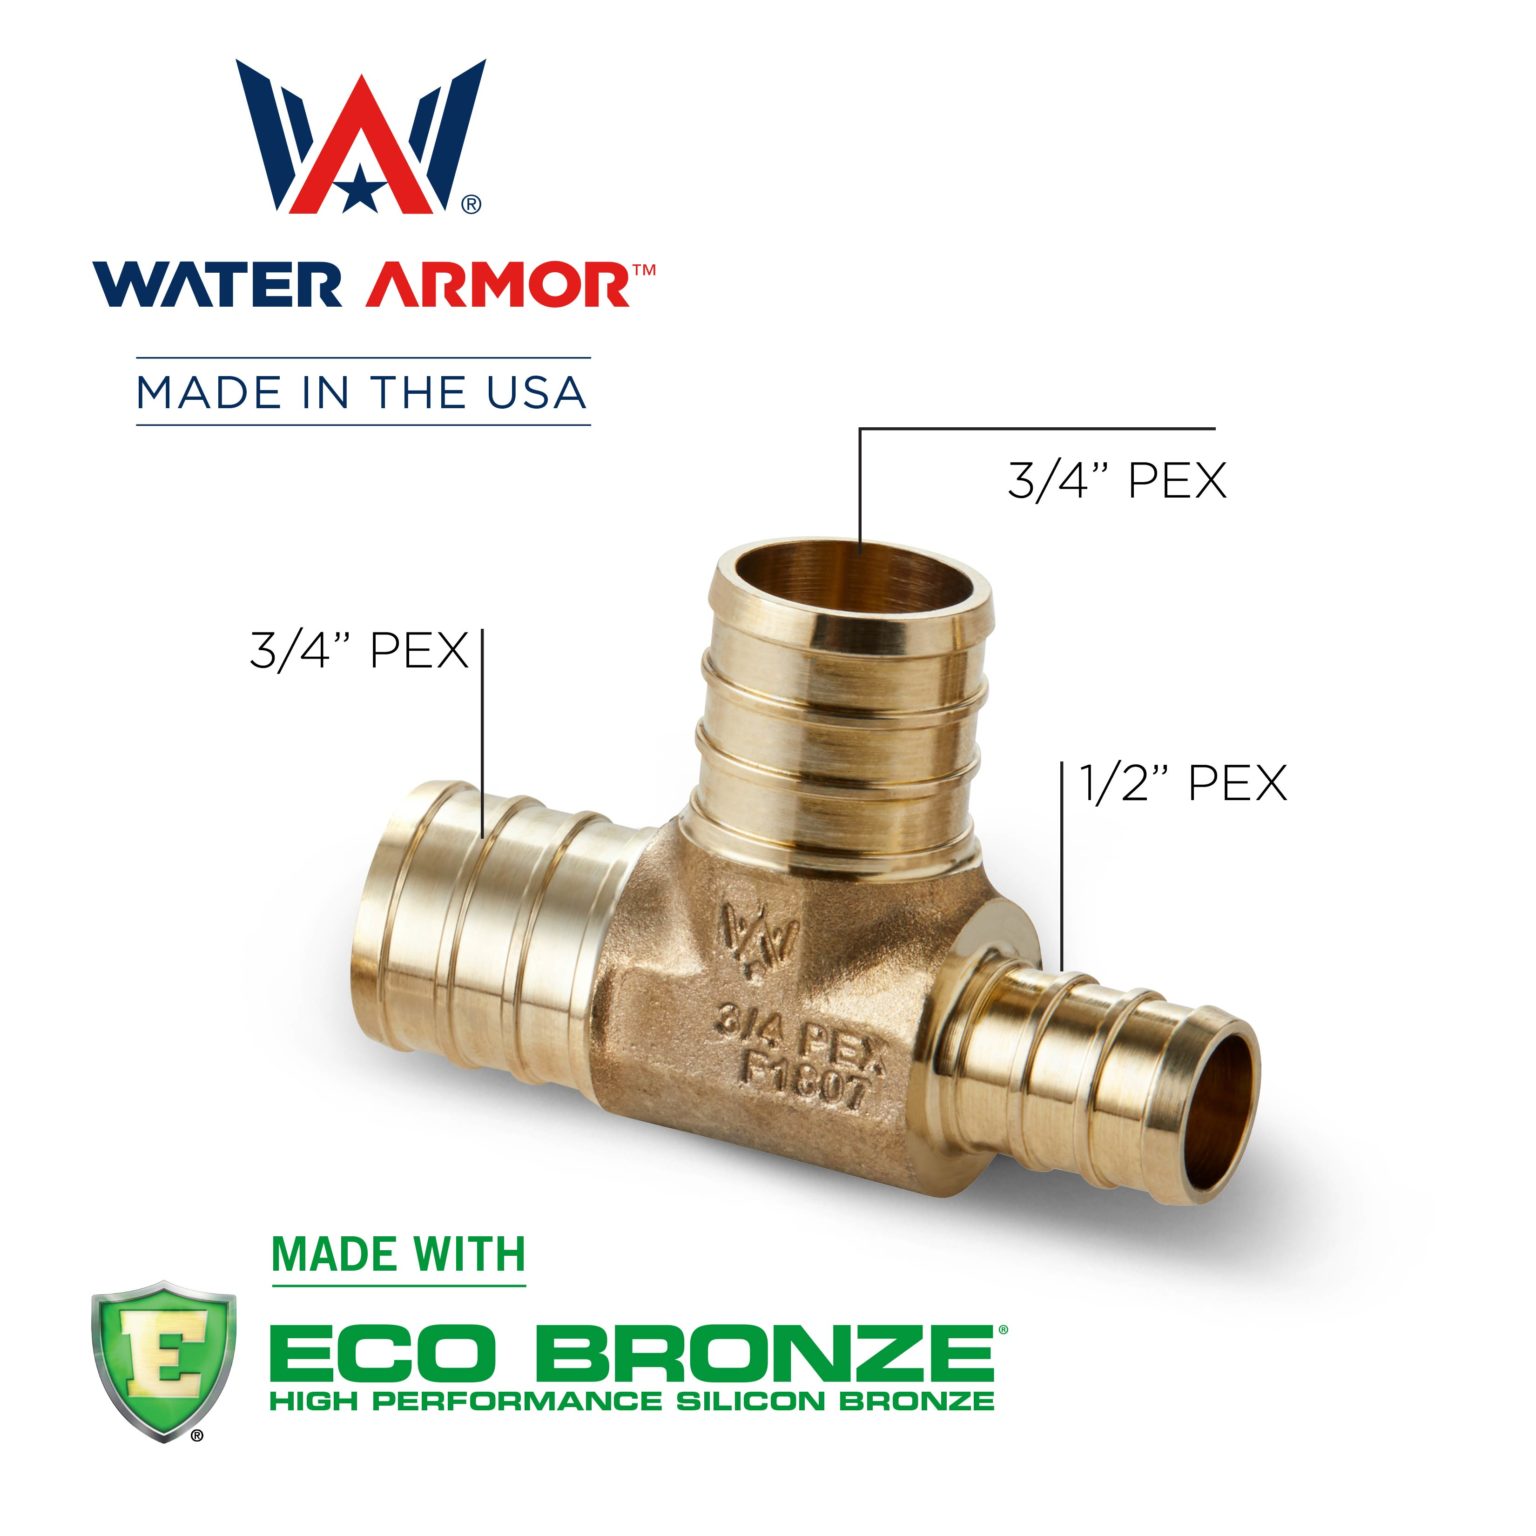 3/4" x 1/2" x 3/4" Water Armor PEX Reducing Tee Made With Eco Bronze